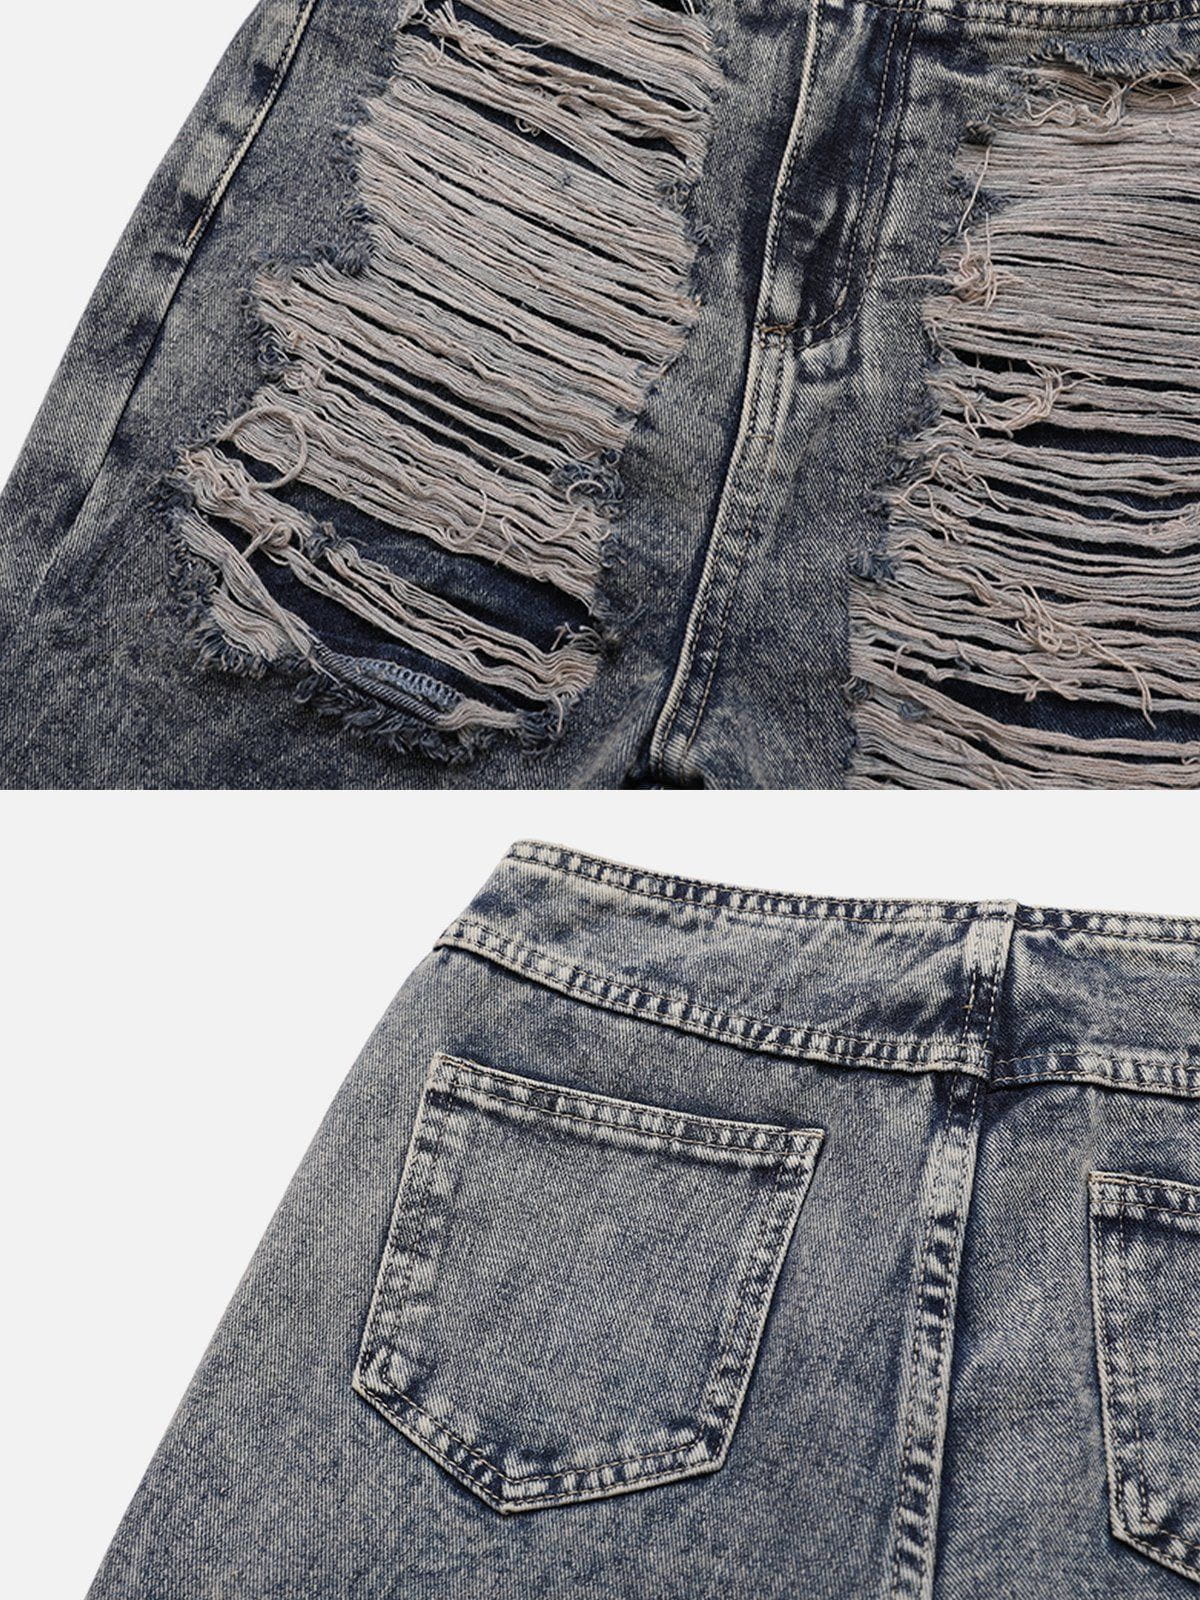 Distressed Washed Jeans Faire Echo